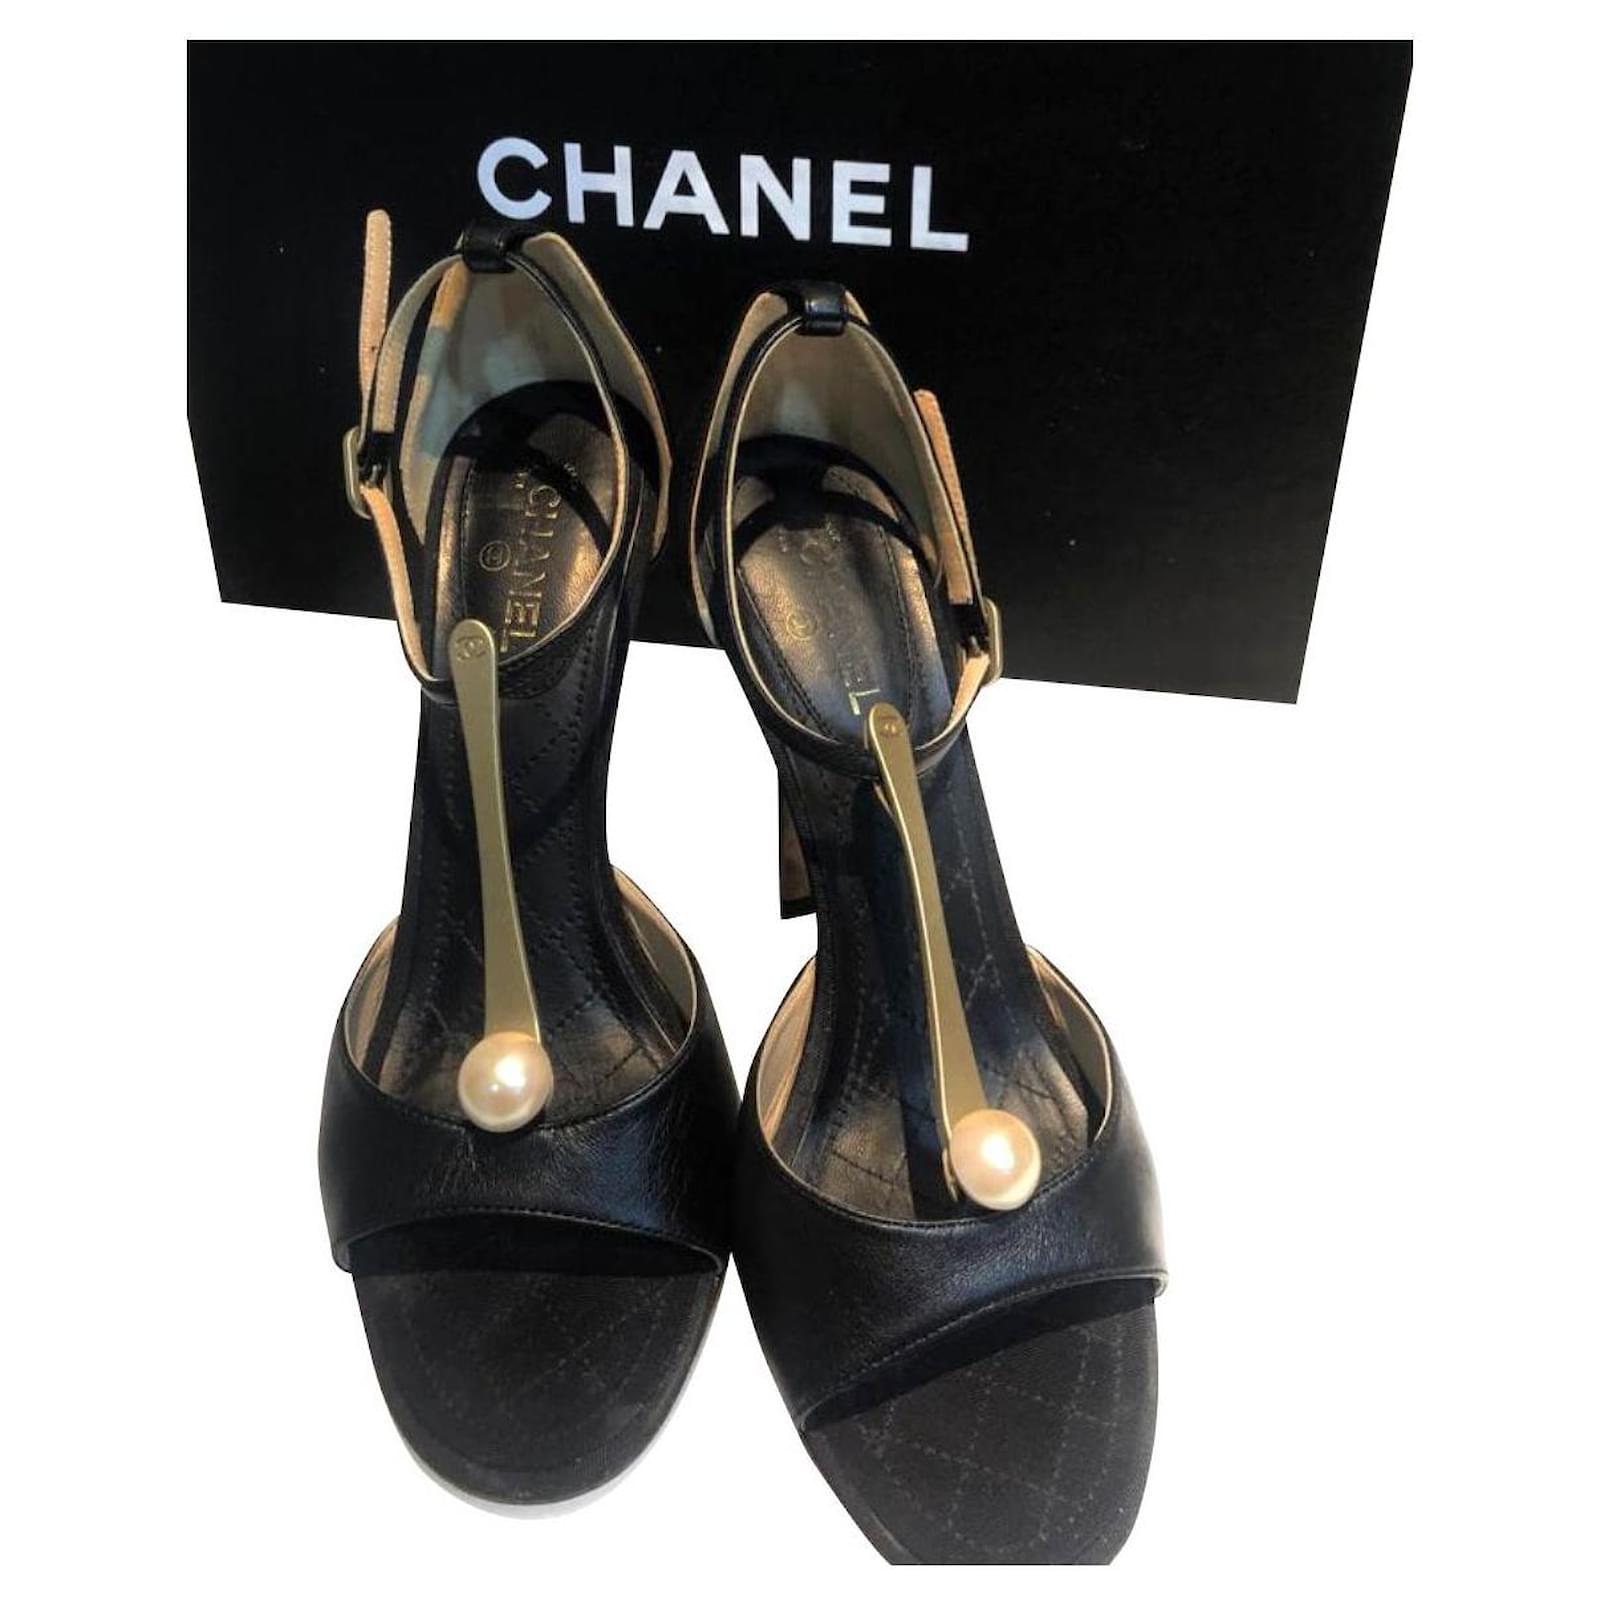 Chanel Black Leather Pearl Heel Sandals Size 38.5 Chanel